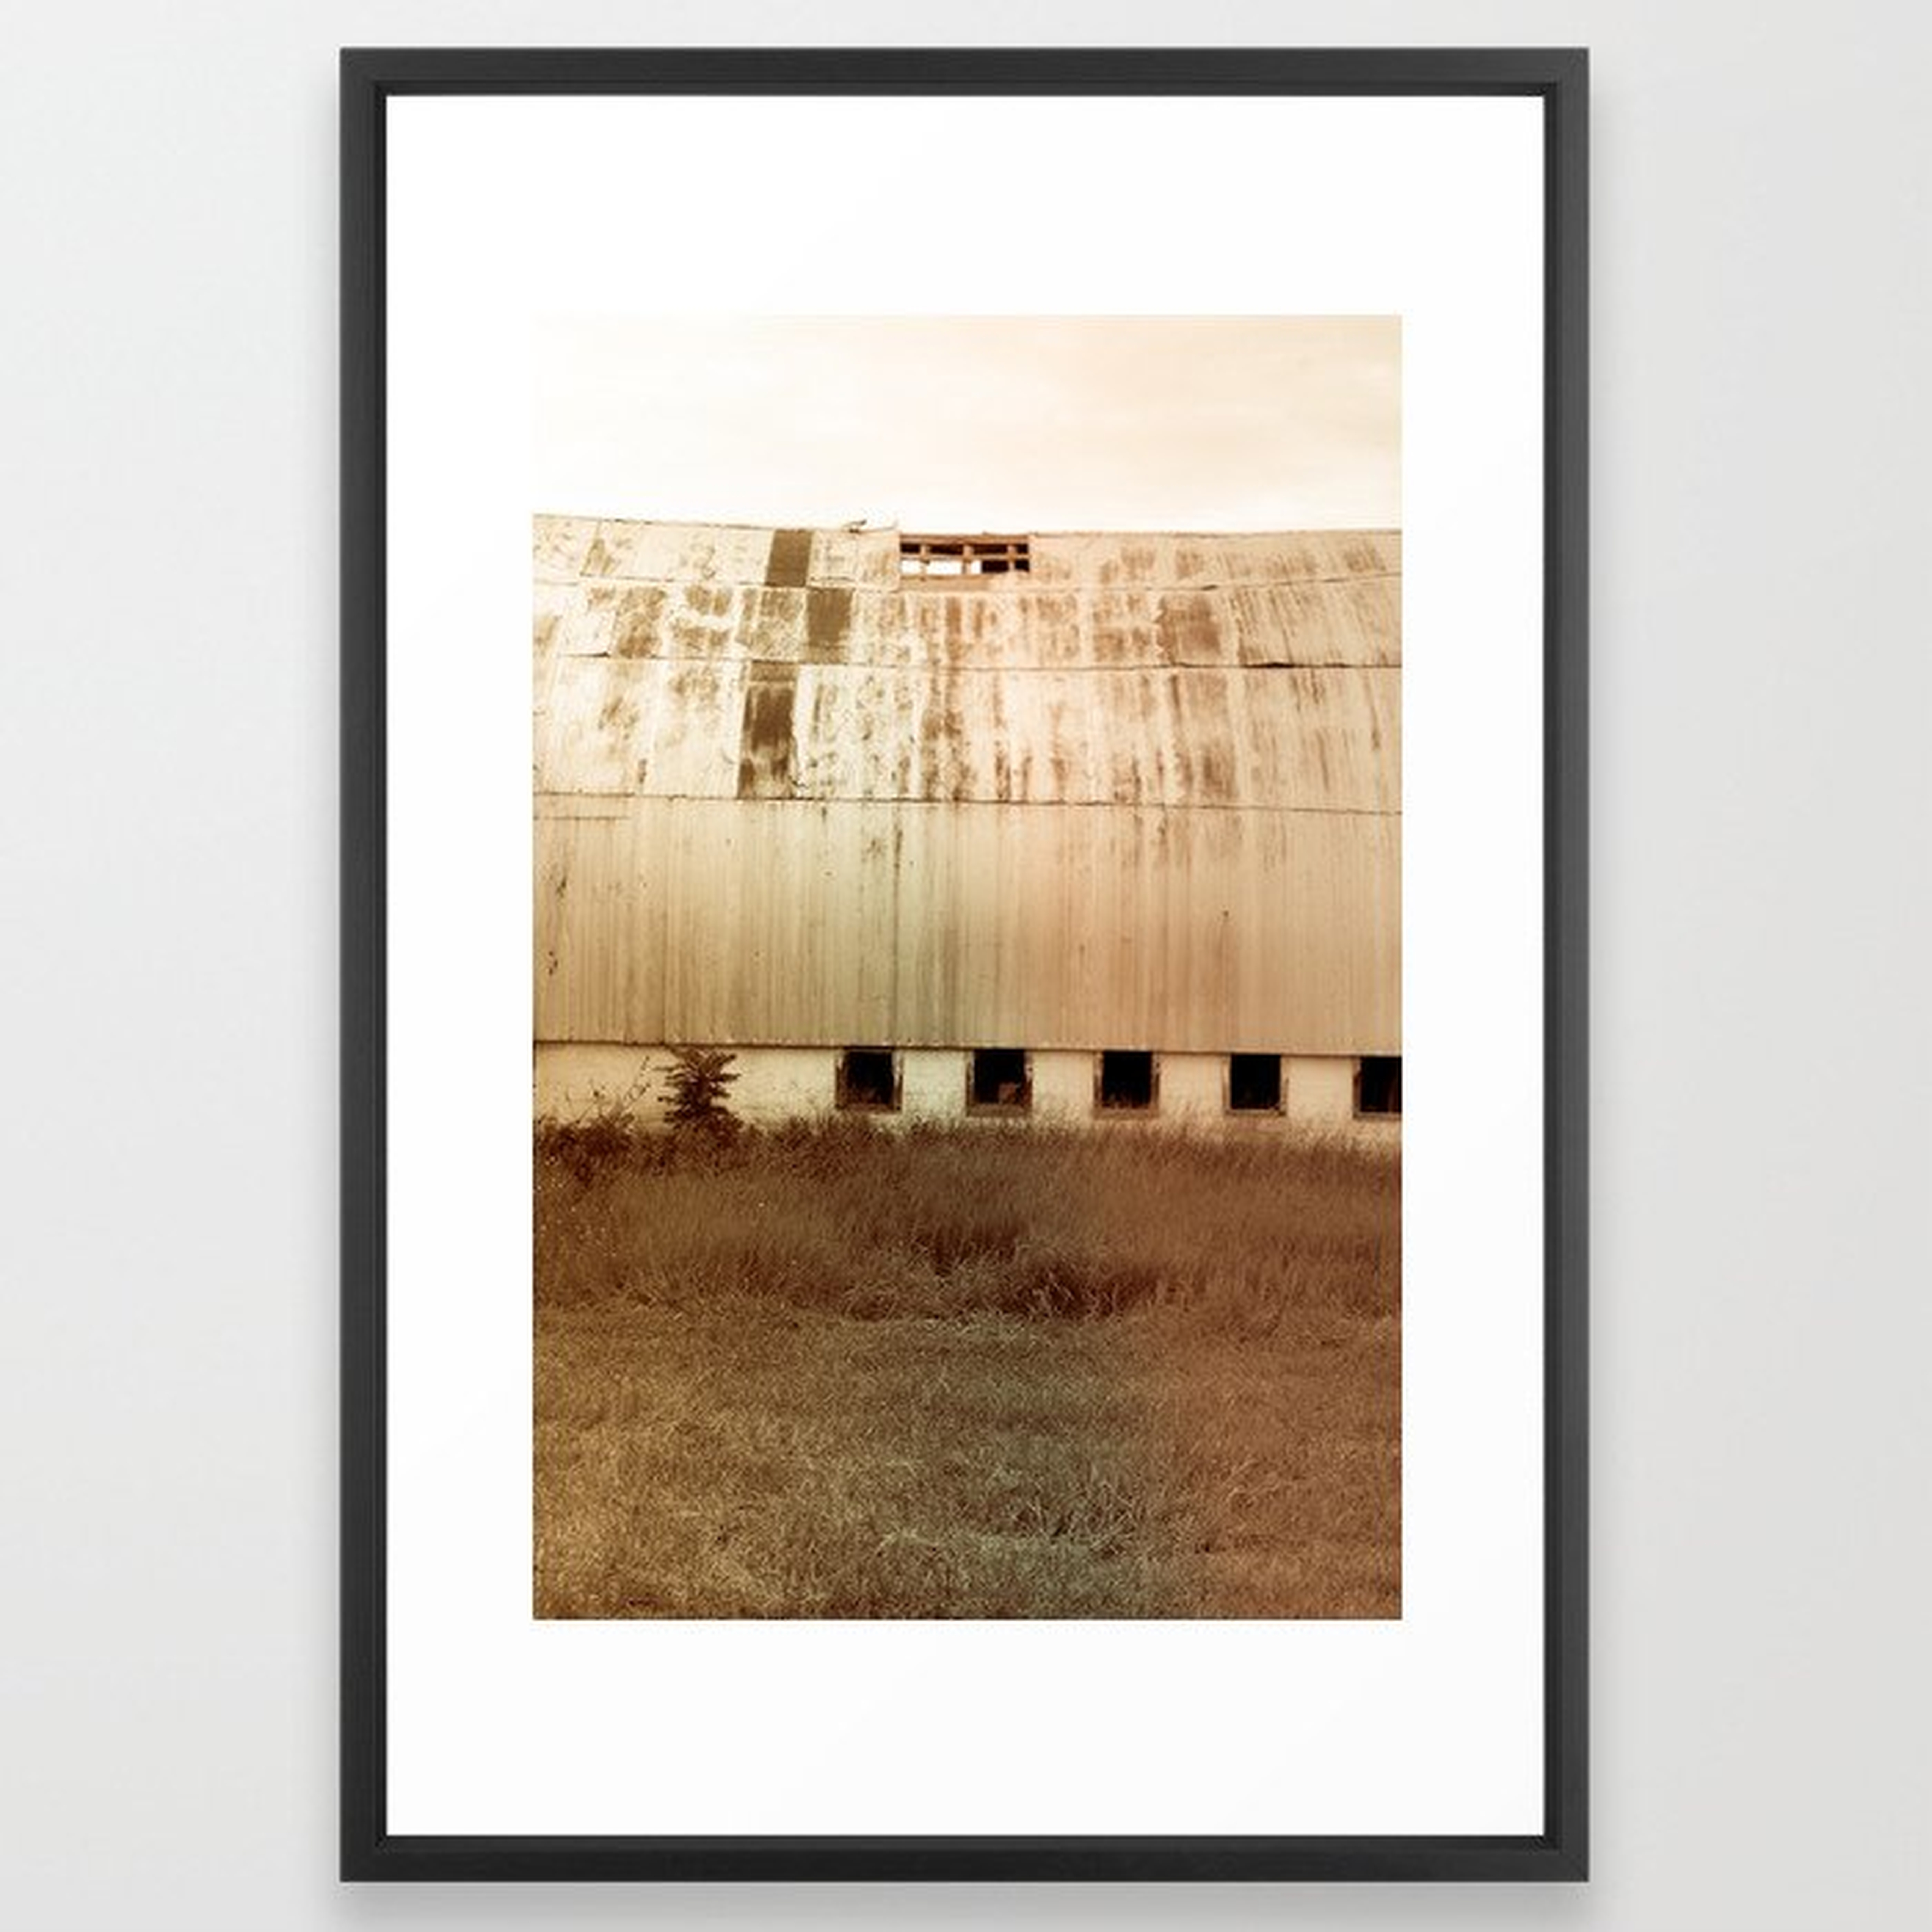 Michigan Barn Framed Art Print by Olivia Joy St.claire - Cozy Home Decor, - Vector Black - LARGE (Gallery)-26x38 - Society6